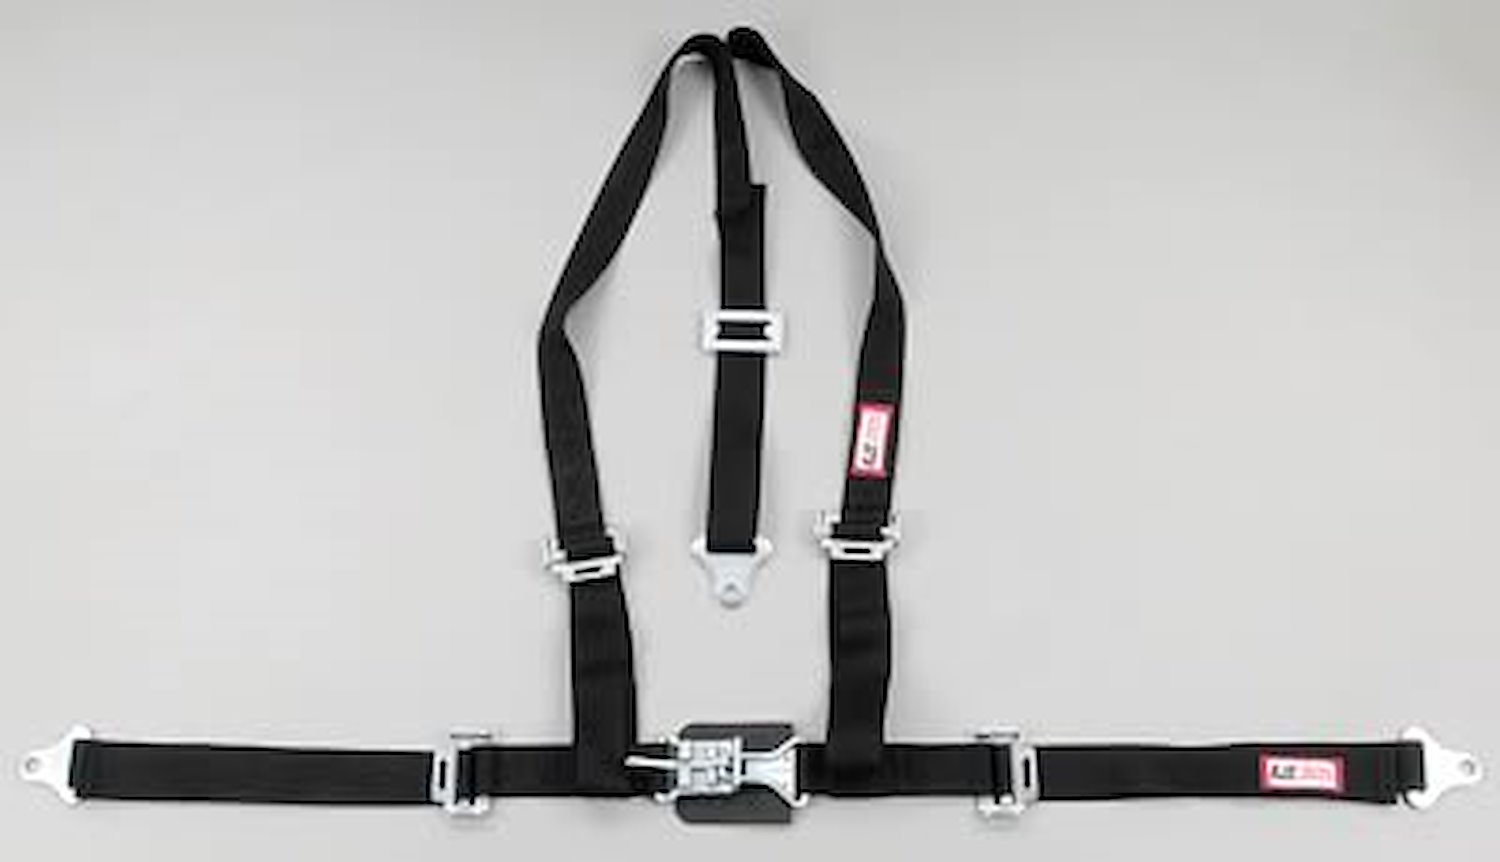 NON-SFI L&L HARNESS 2 PULL UP Lap Belt SNAP SEWN IN 2 S.H. Y FLOOR Mount w/STERNUM STRAP WRAP/SNAP OD GREEN